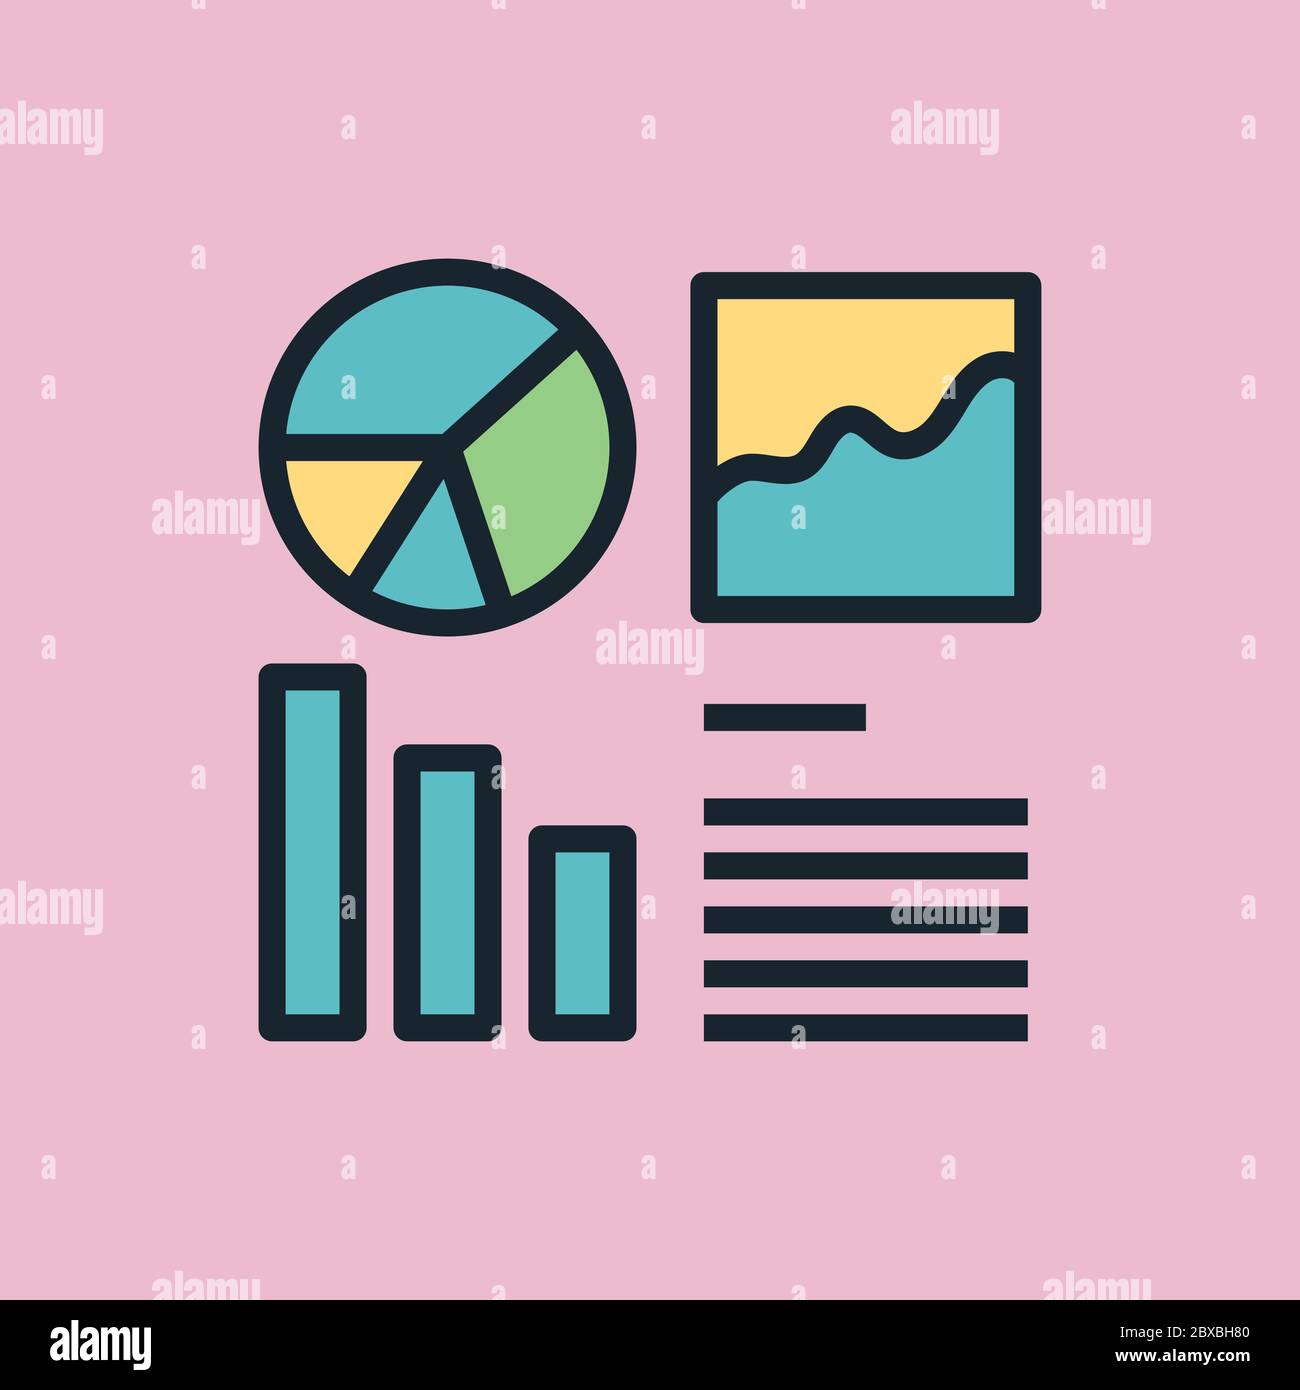 Analytics. Digital marketing concept illustration, flat design linear style banner. Usage for e-mail newsletters, headers, blog posts, print and more. Stock Vector